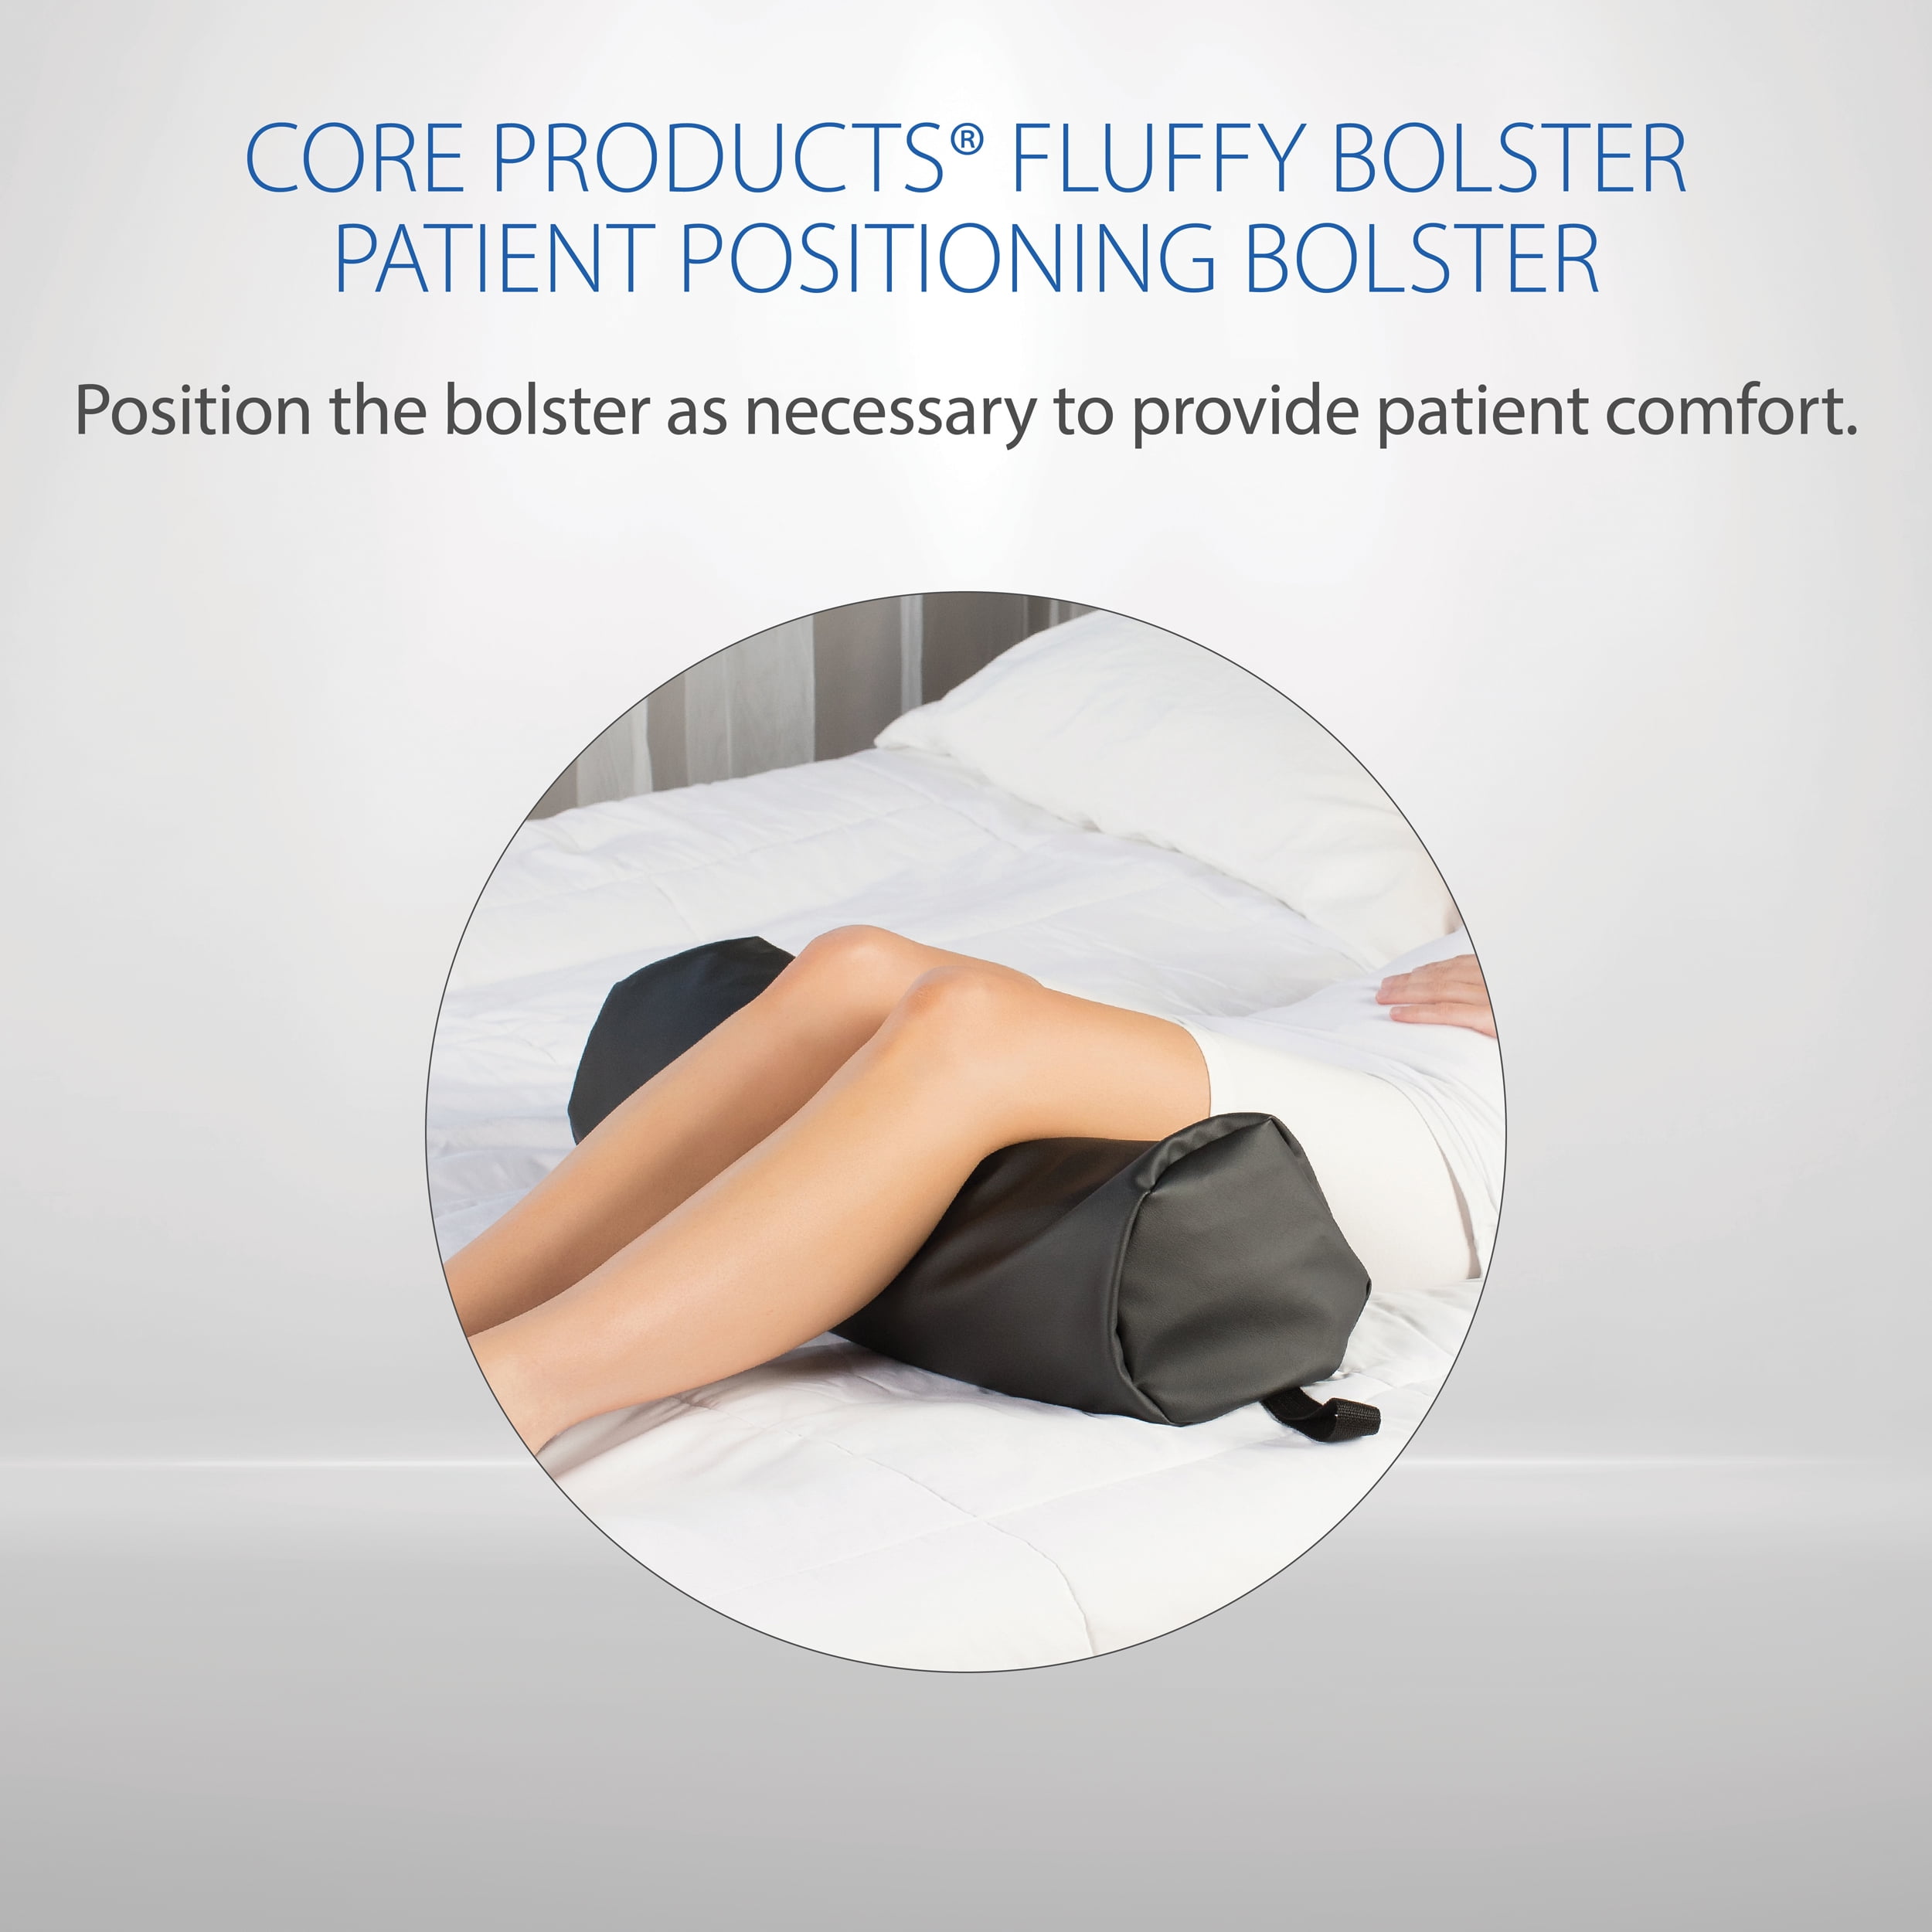 Core Products Traction Table Knee Bolster Cushion Set - Size Dual Height